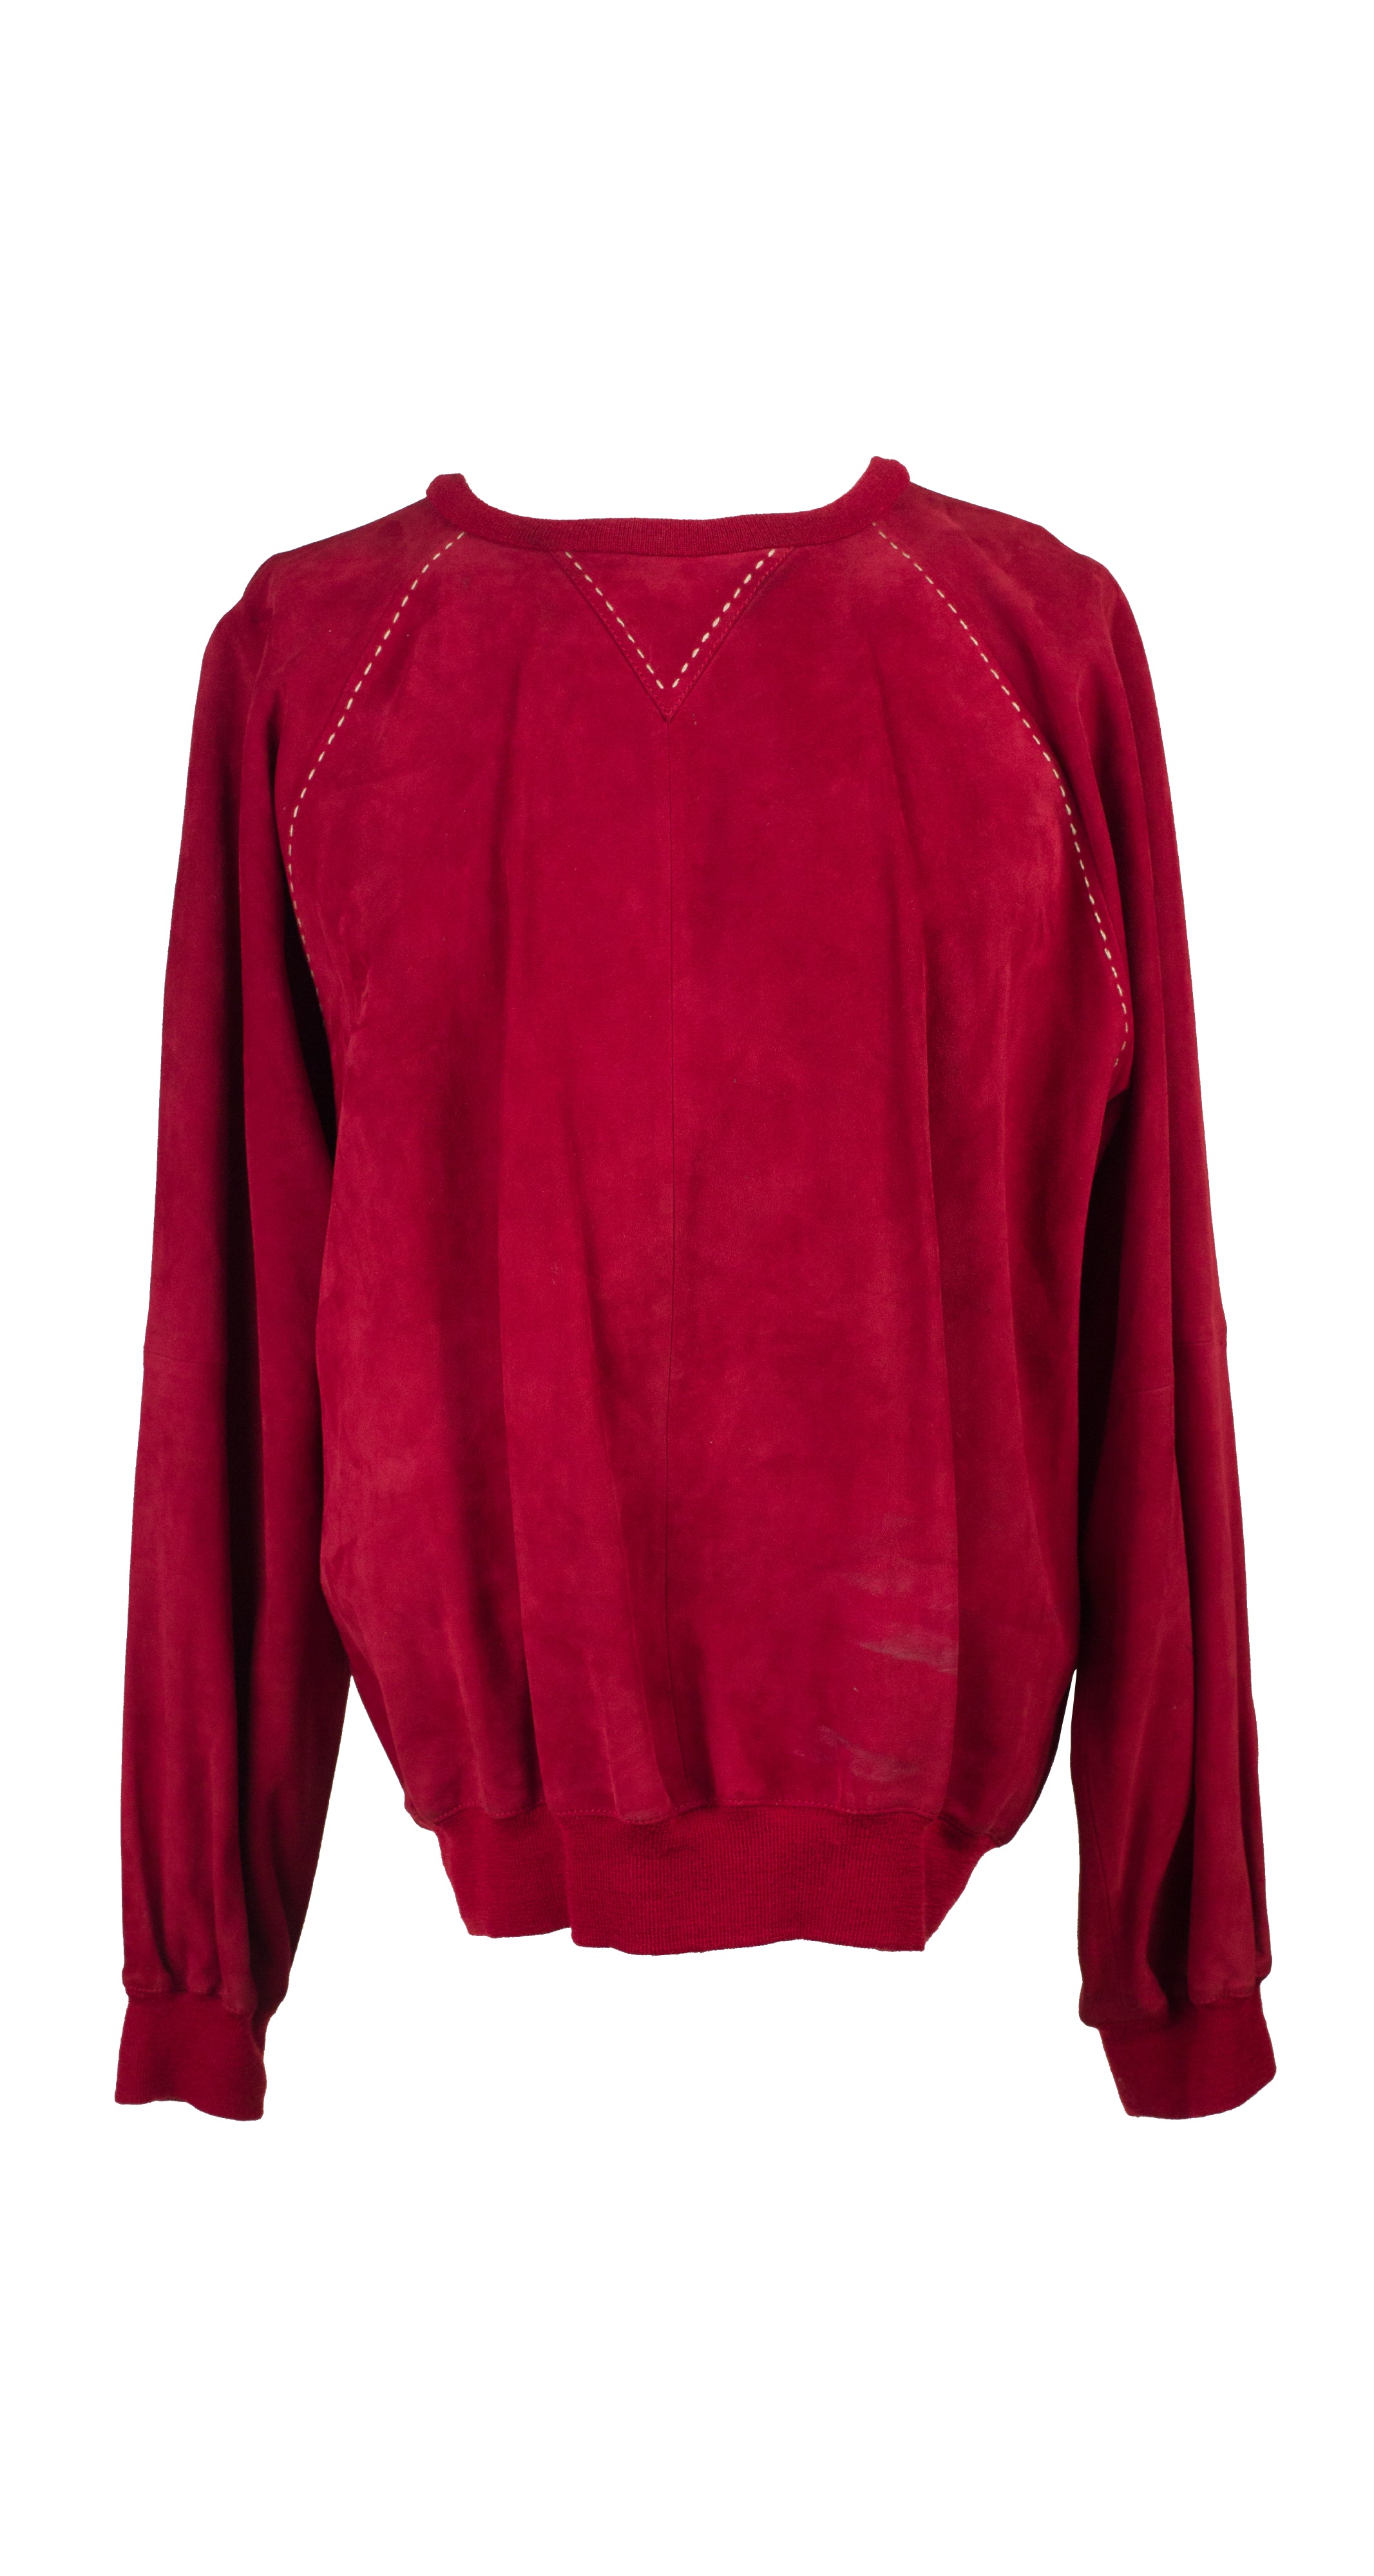 1980s Men's Red Suede Pullover Sweater